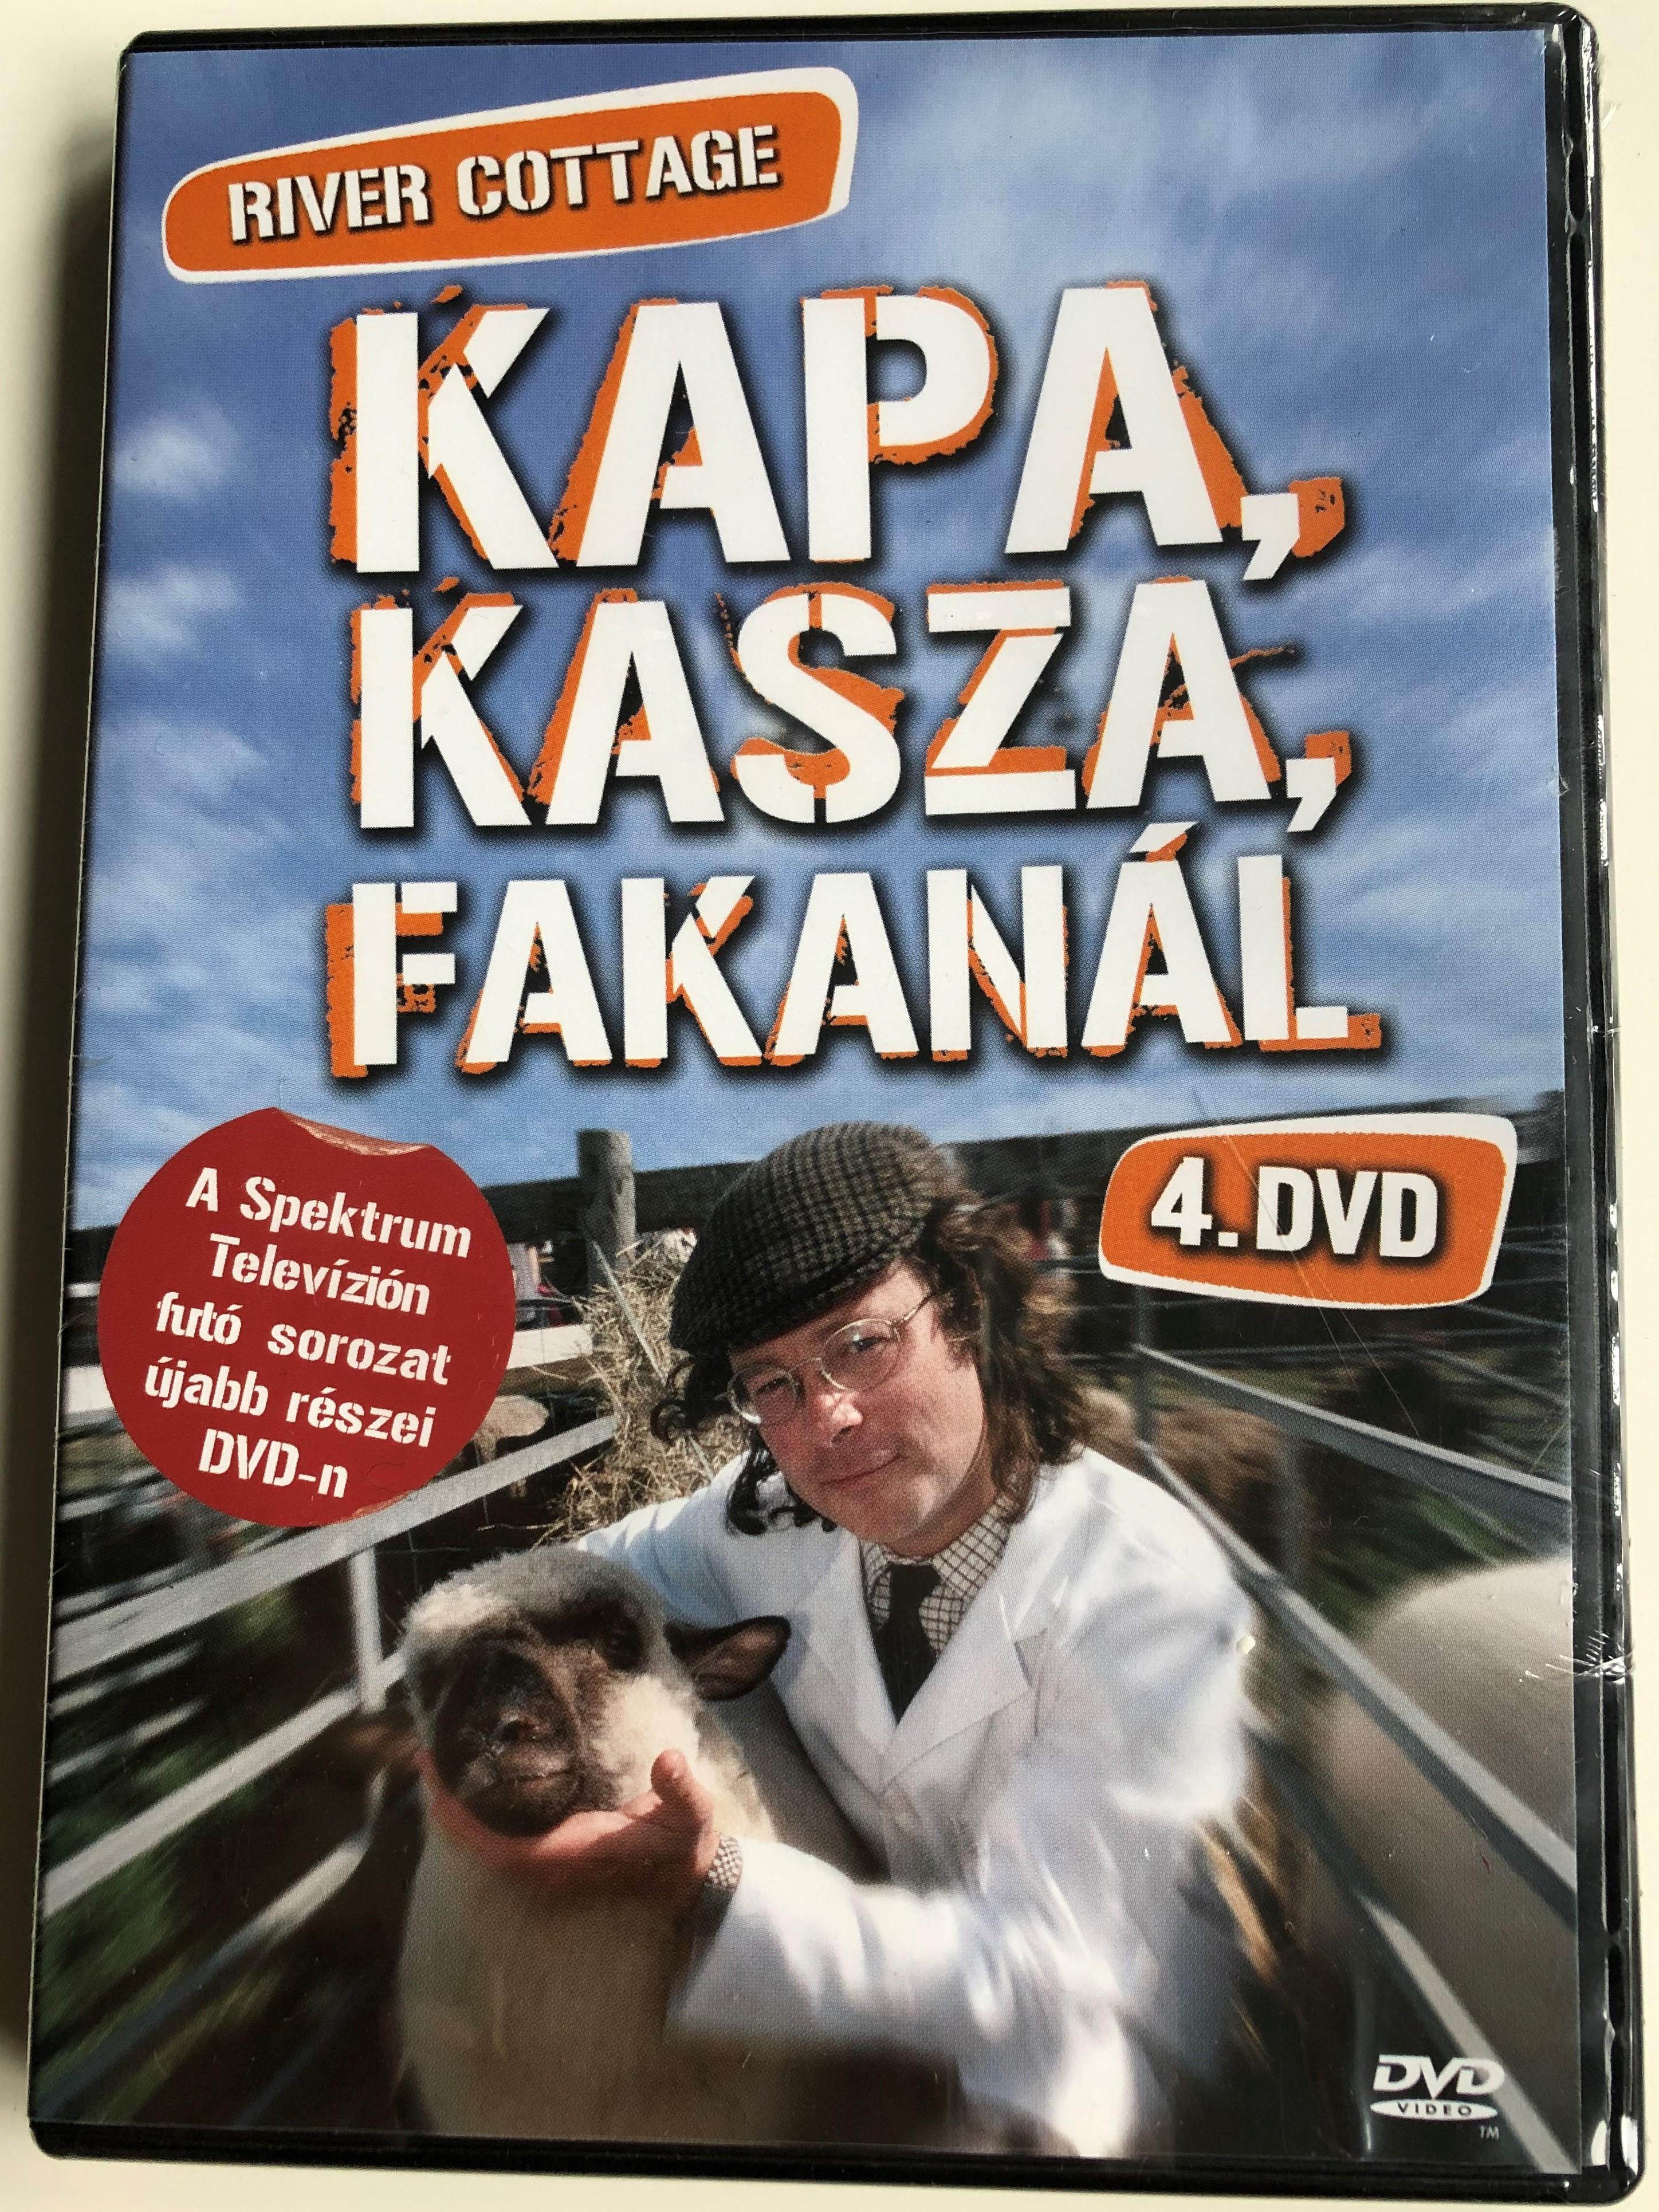 River Cottage Disc 4 DVD 1999 Kapa, kasza, fakanál 4 / Directed by Zam  Baring, Andrew Palmer, Billy Paulett / Cooking with Hugh  Fearnley-Whittingstall / 3 Episodes on Disc / ER6052 - bibleinmylanguage